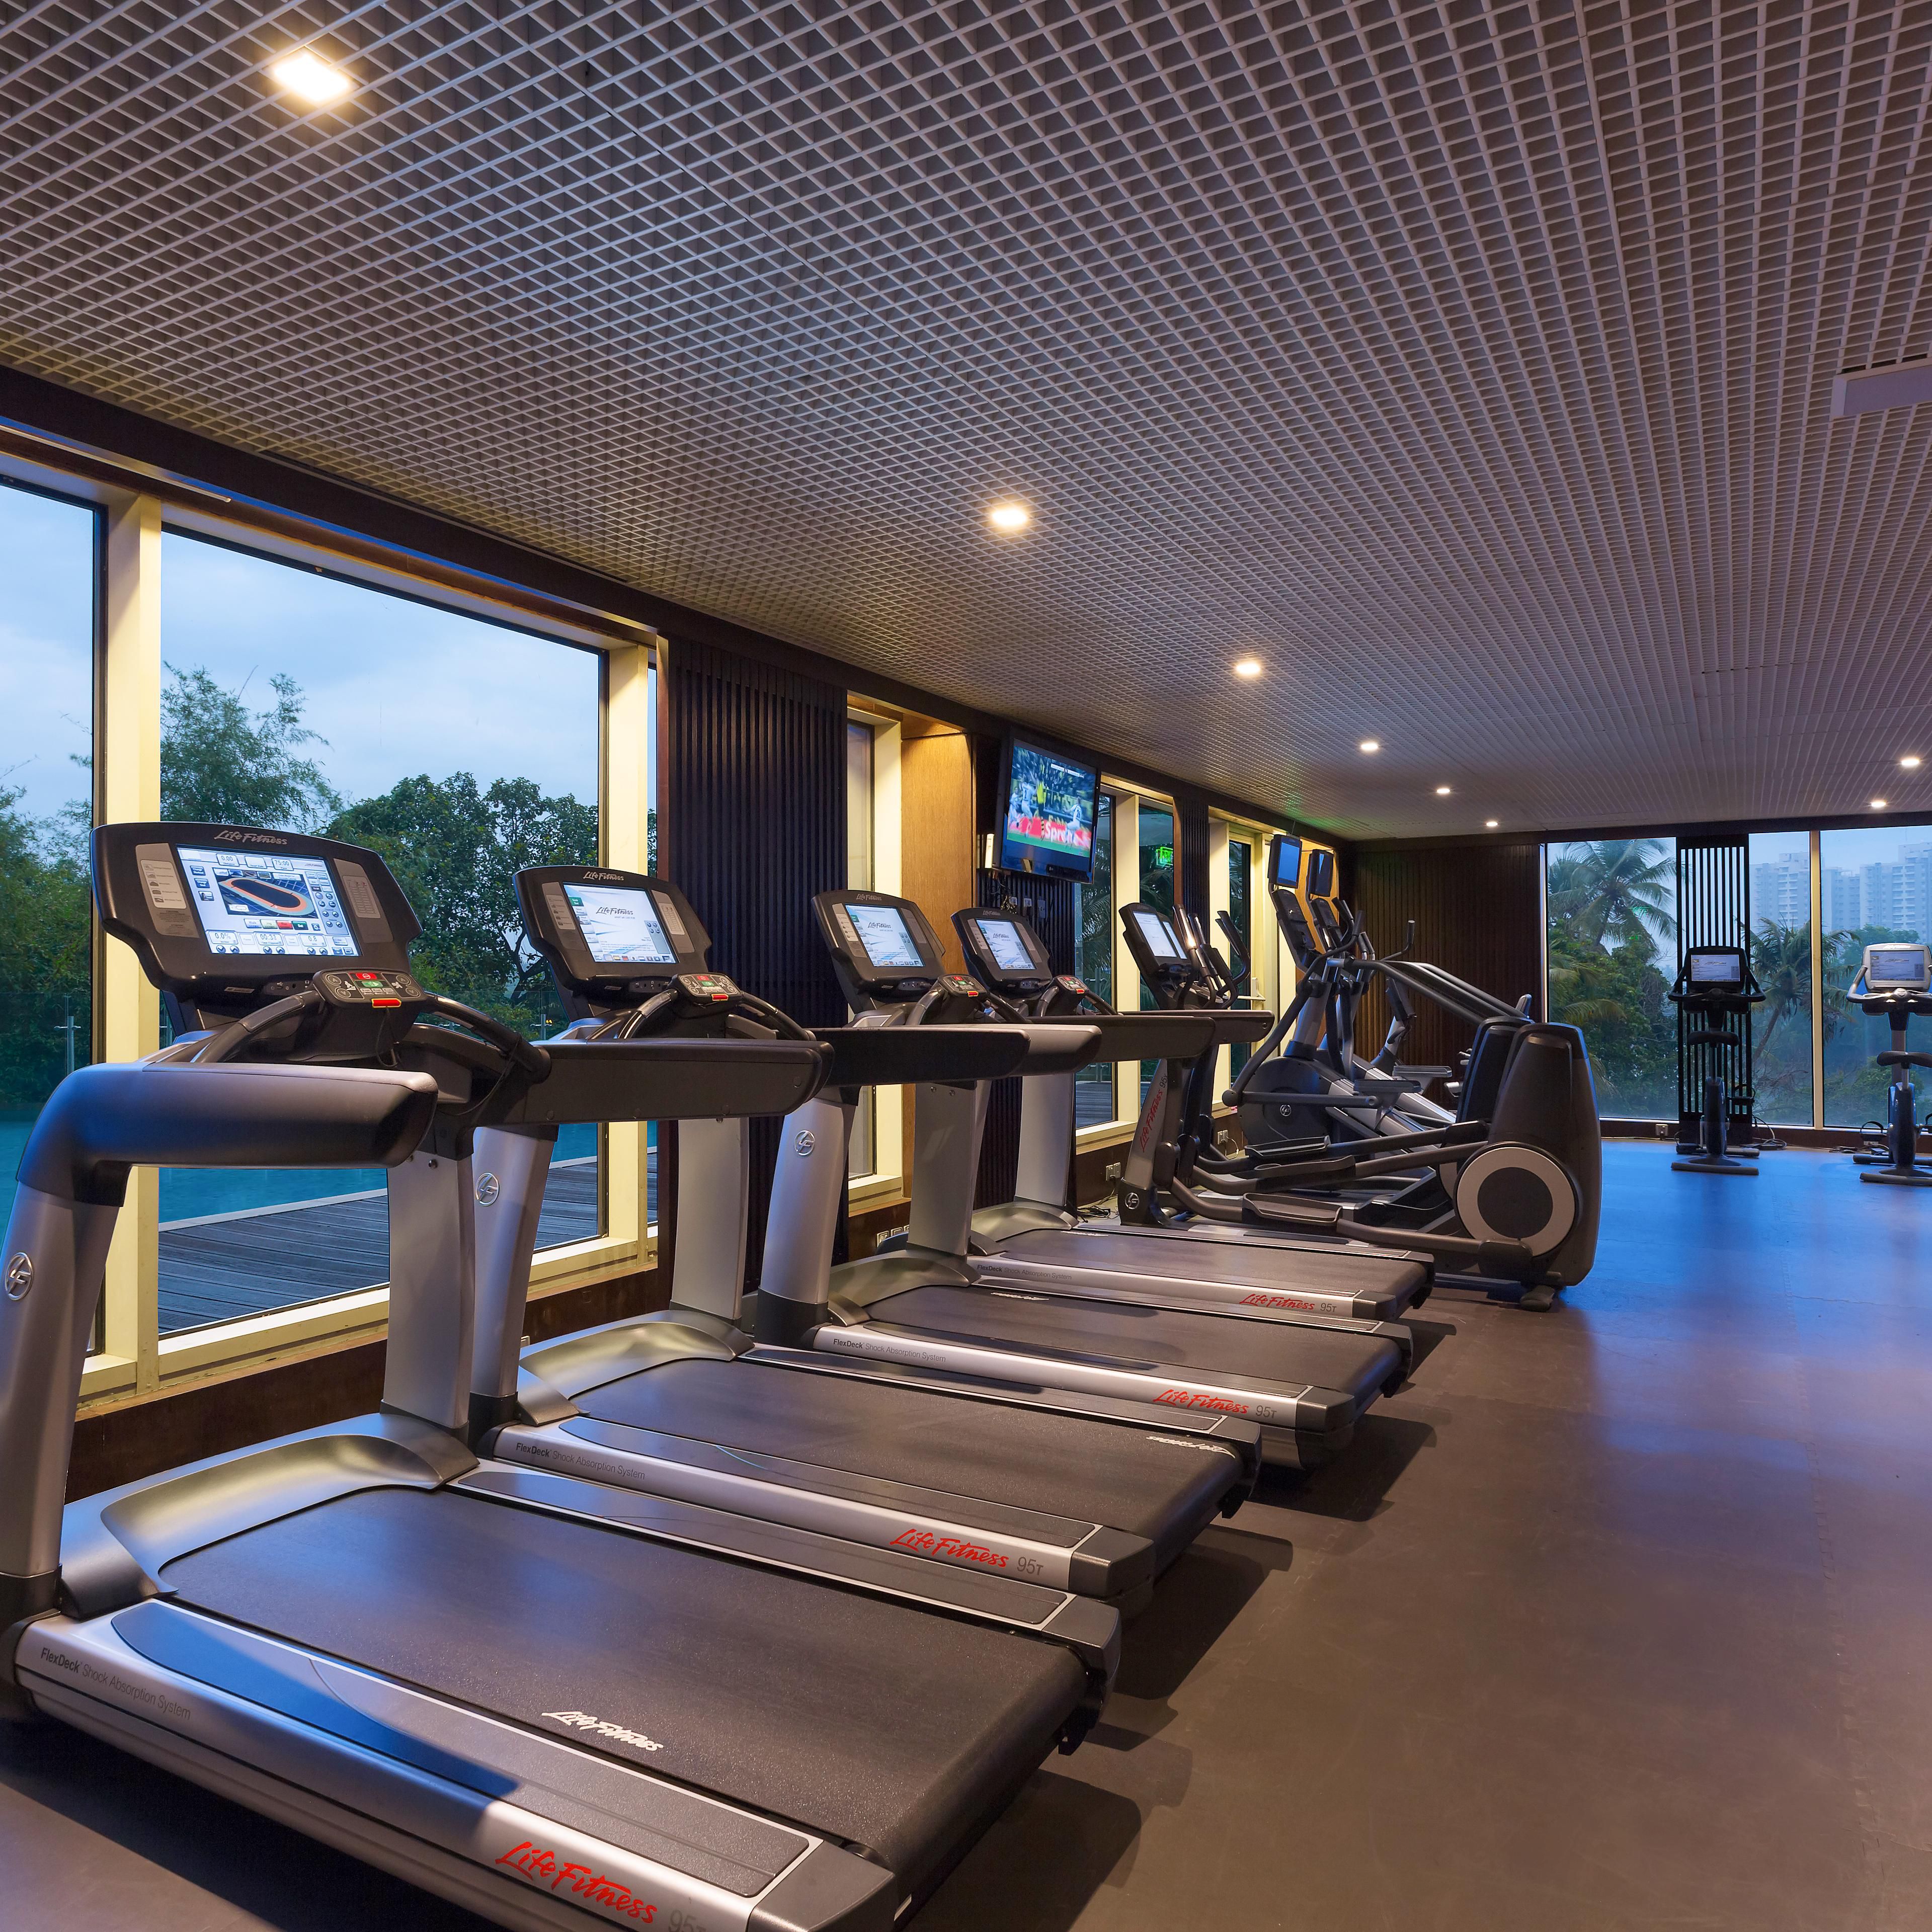 Work out with a panoramic view of the pool and greenery